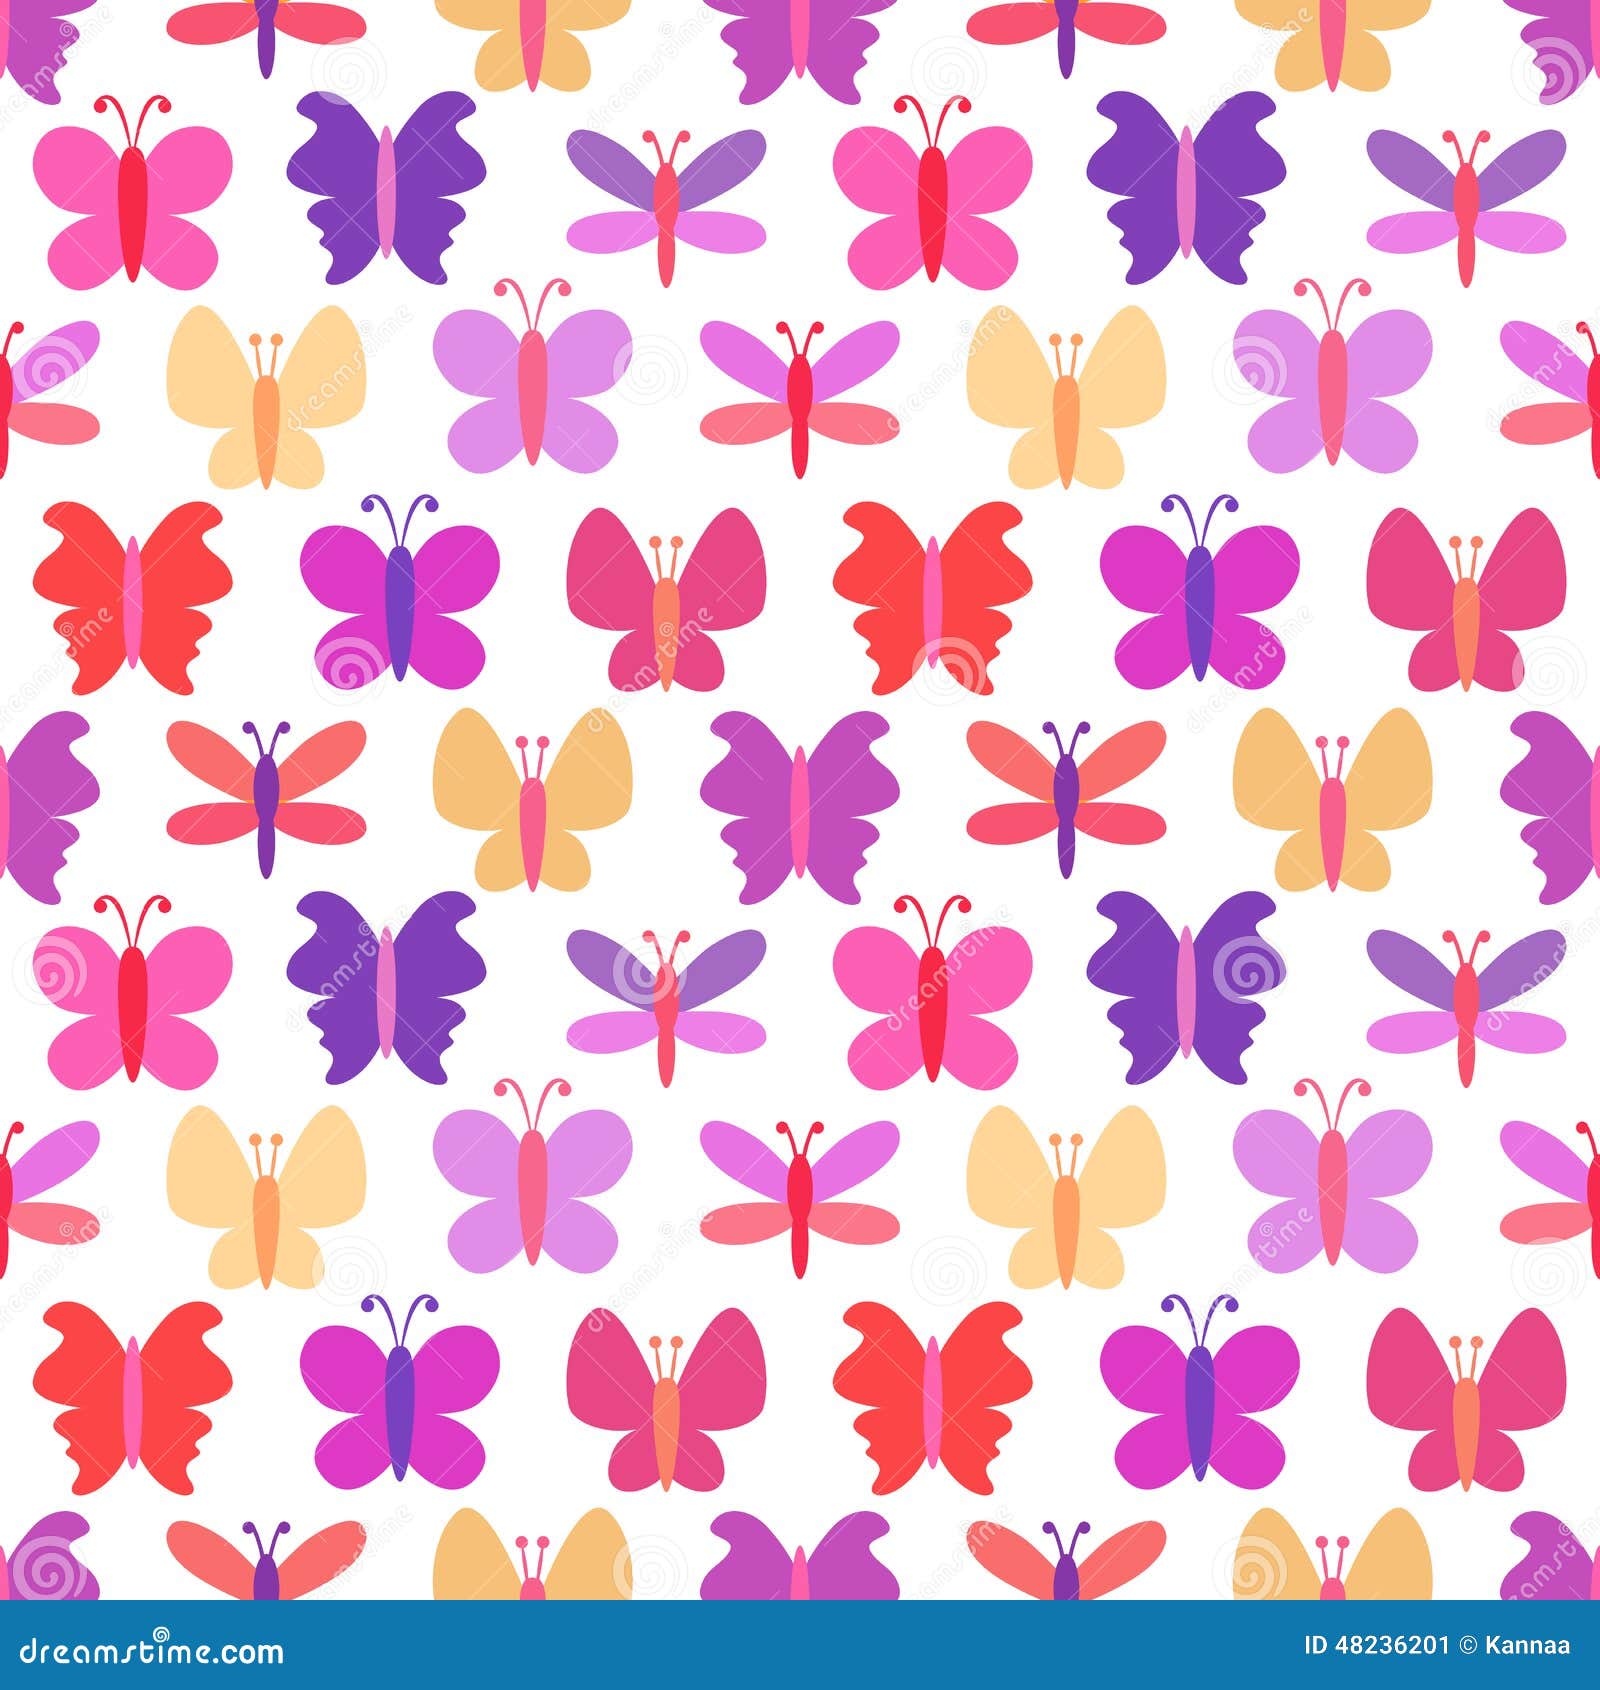 Cute Seamless Vector Pattern of Colorful Butterfly Stock Vector ...